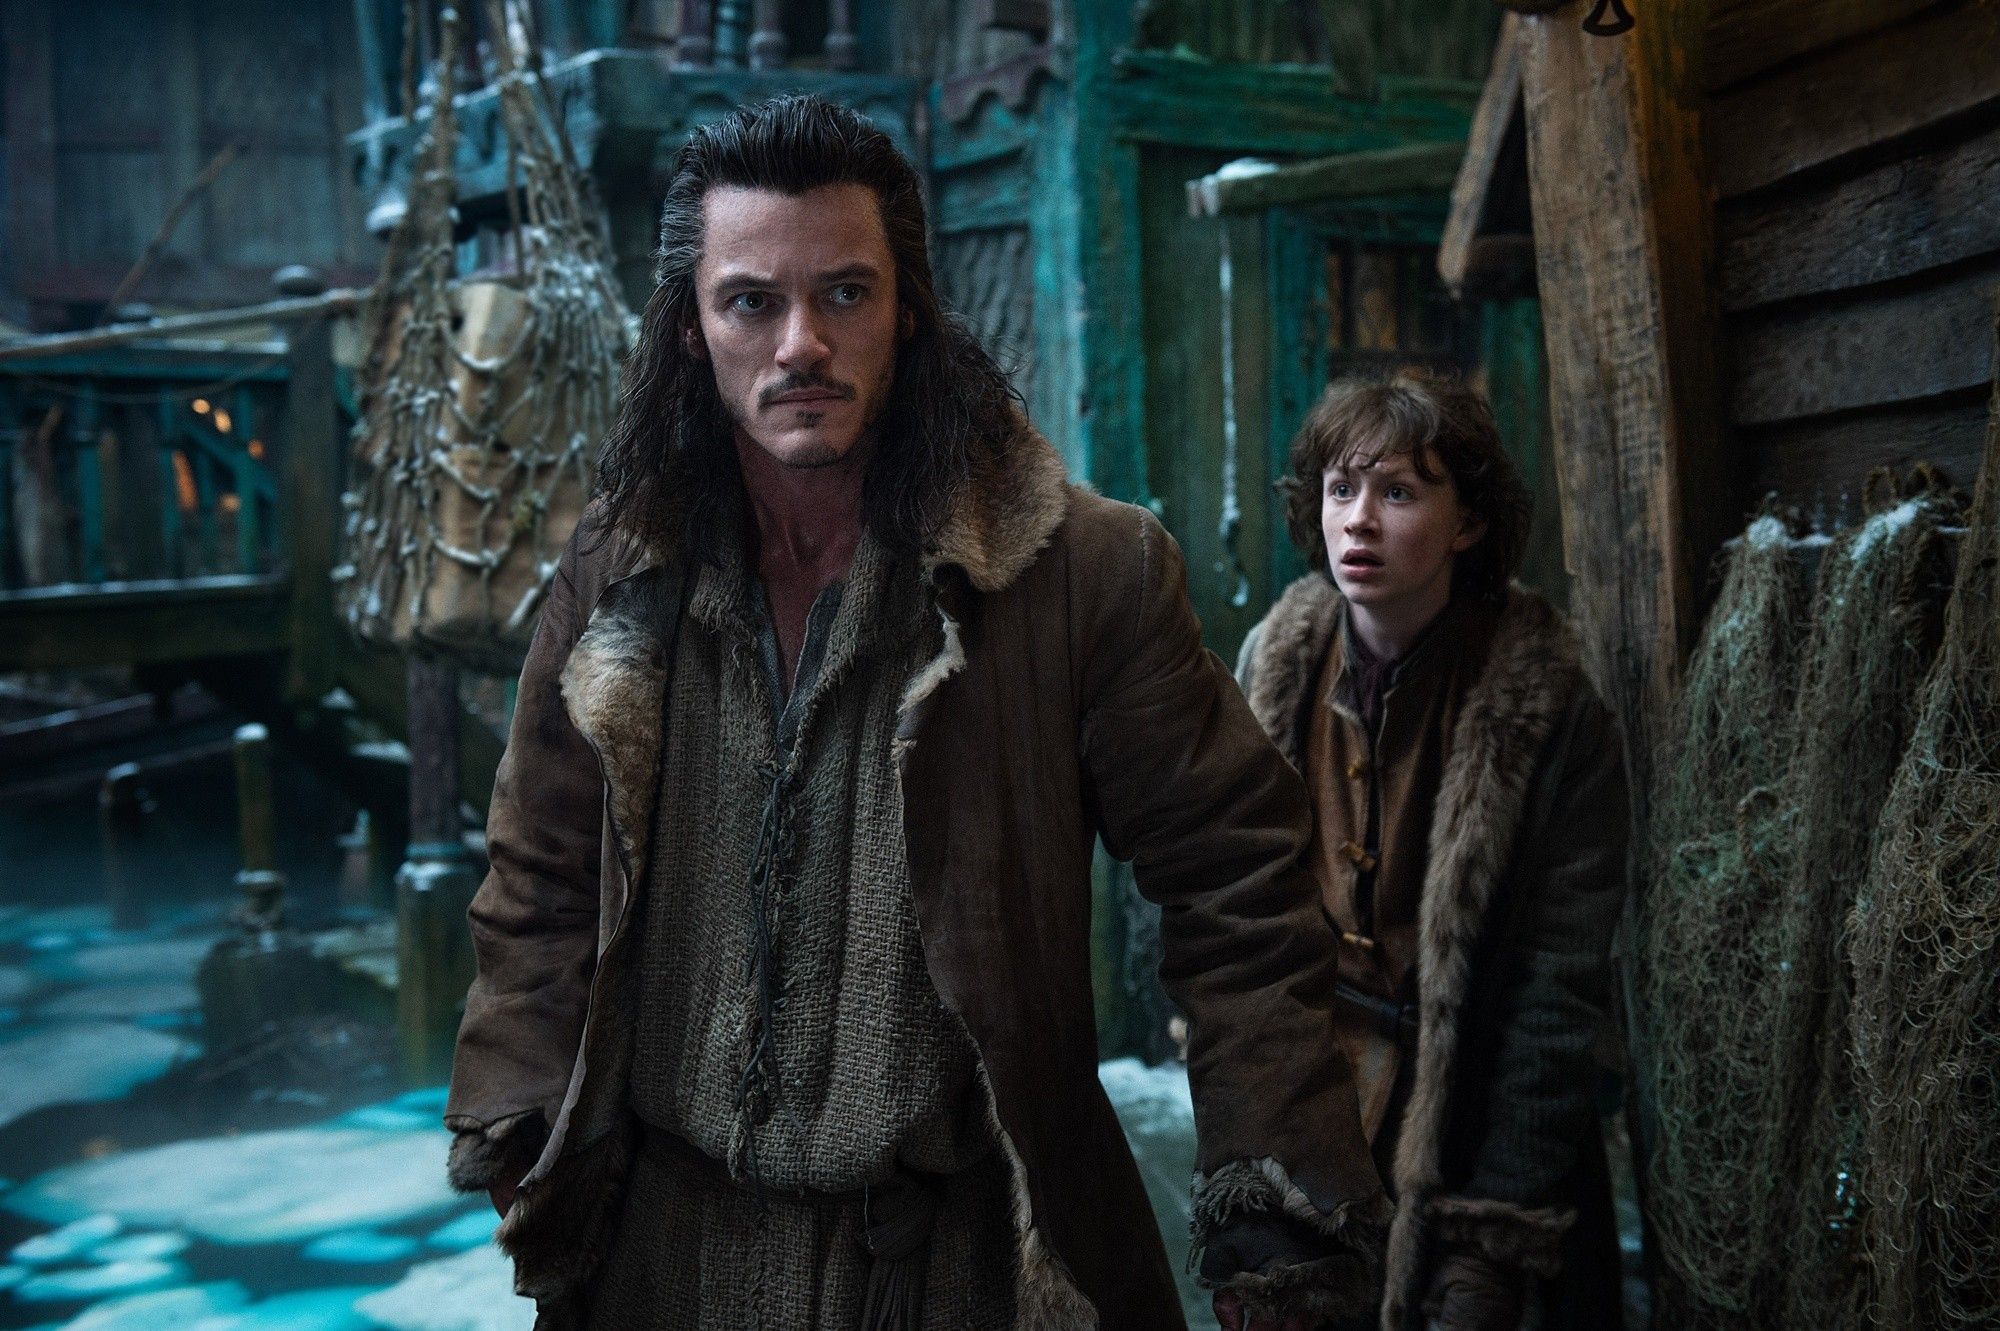 Luke Evans stars as Bard the Bowman and John Bell stars as Bain in Warner Bros. Pictures' The Hobbit: The Desolation of Smaug (2013)